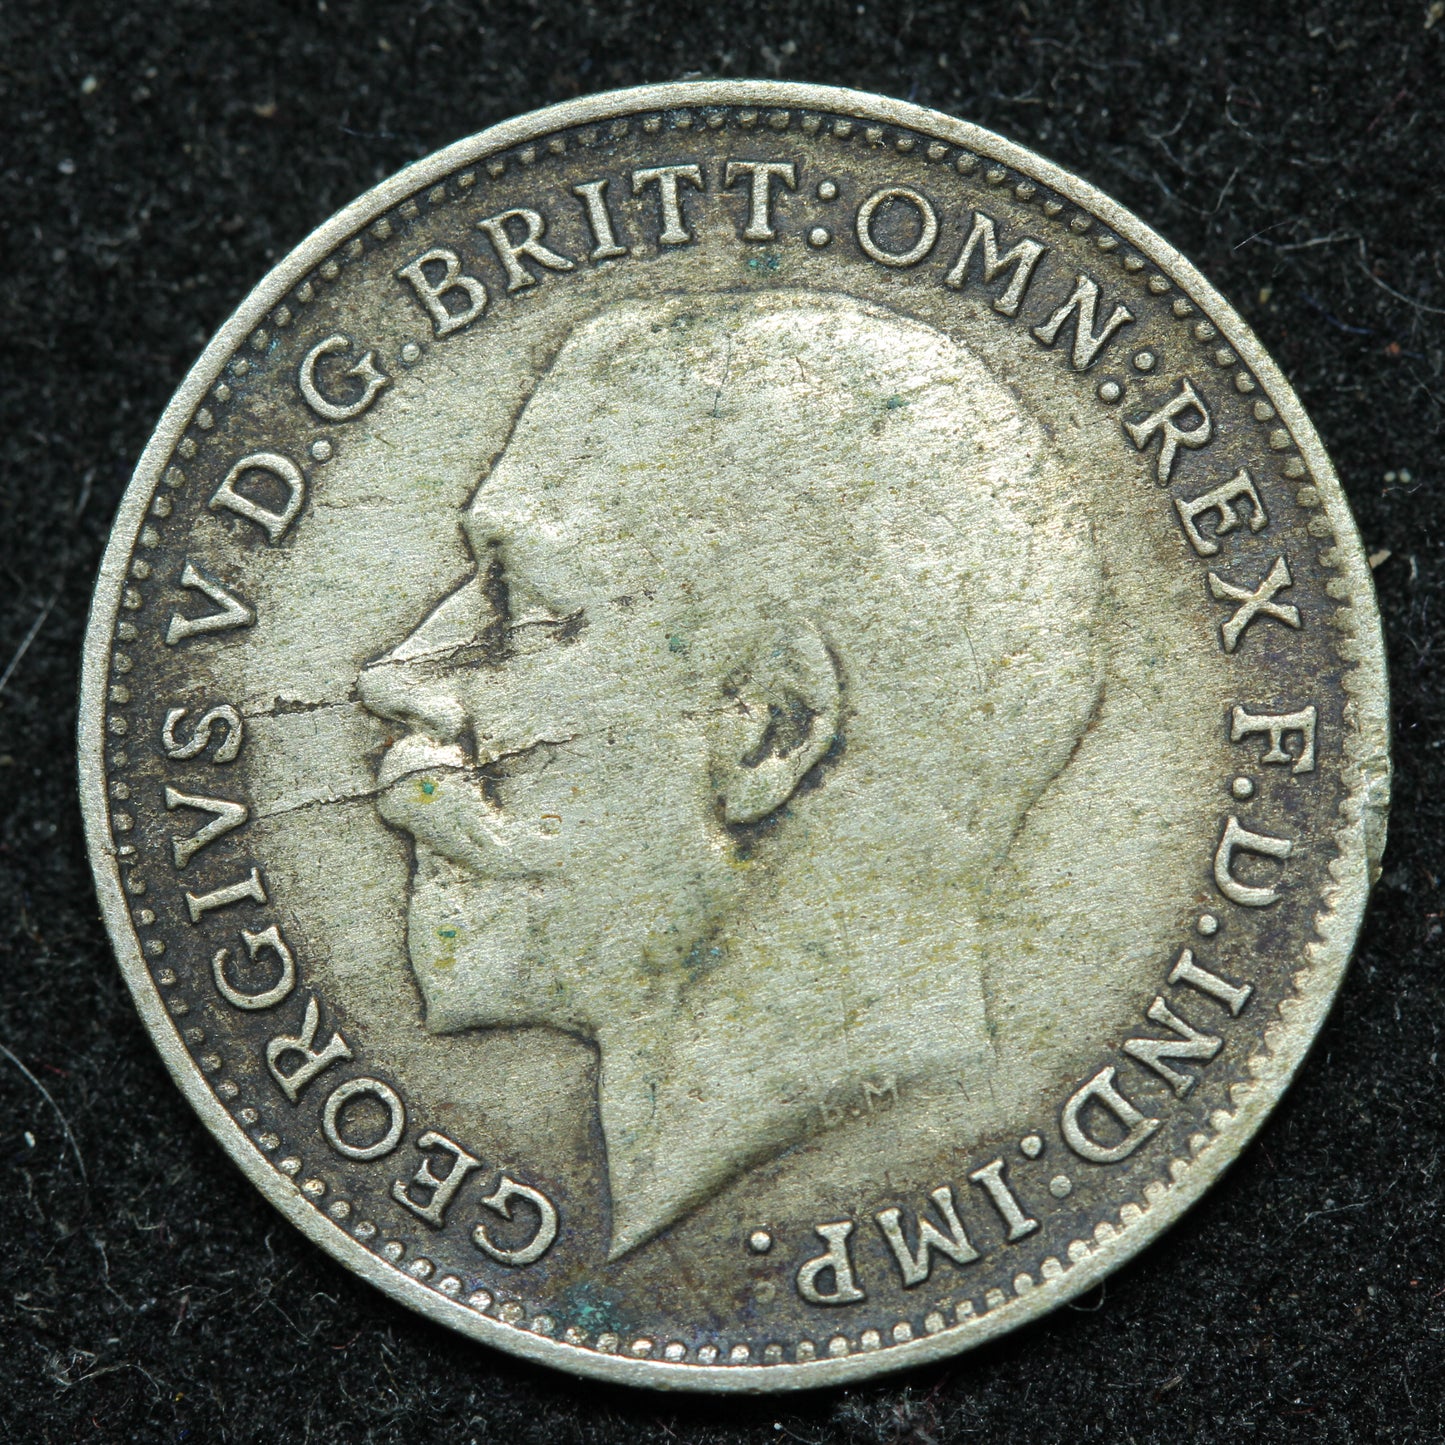 1921 Great Britain 3 Pence Threepence .500 Fine Silver KM#813a